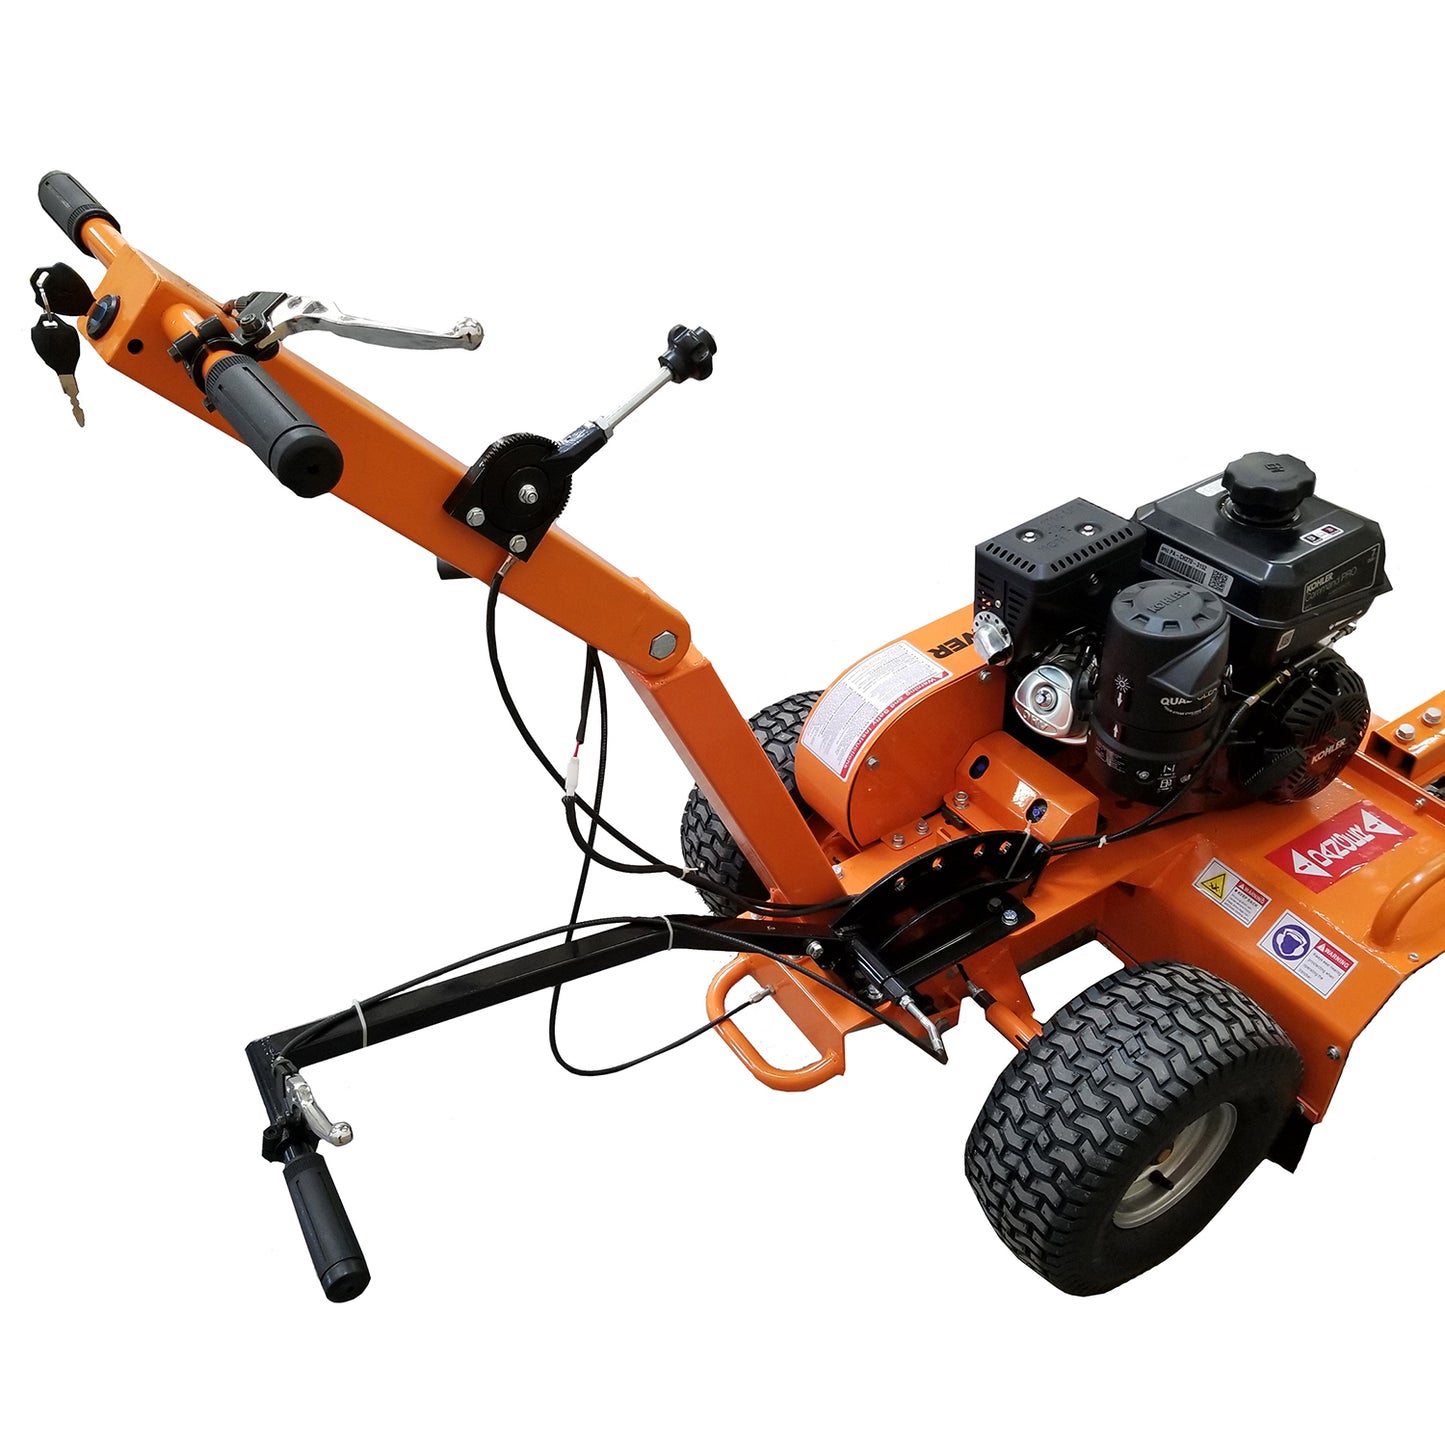 Detail K2 18 Inch 7 HP Trencher - OPT118-Wood Splitter Outlet